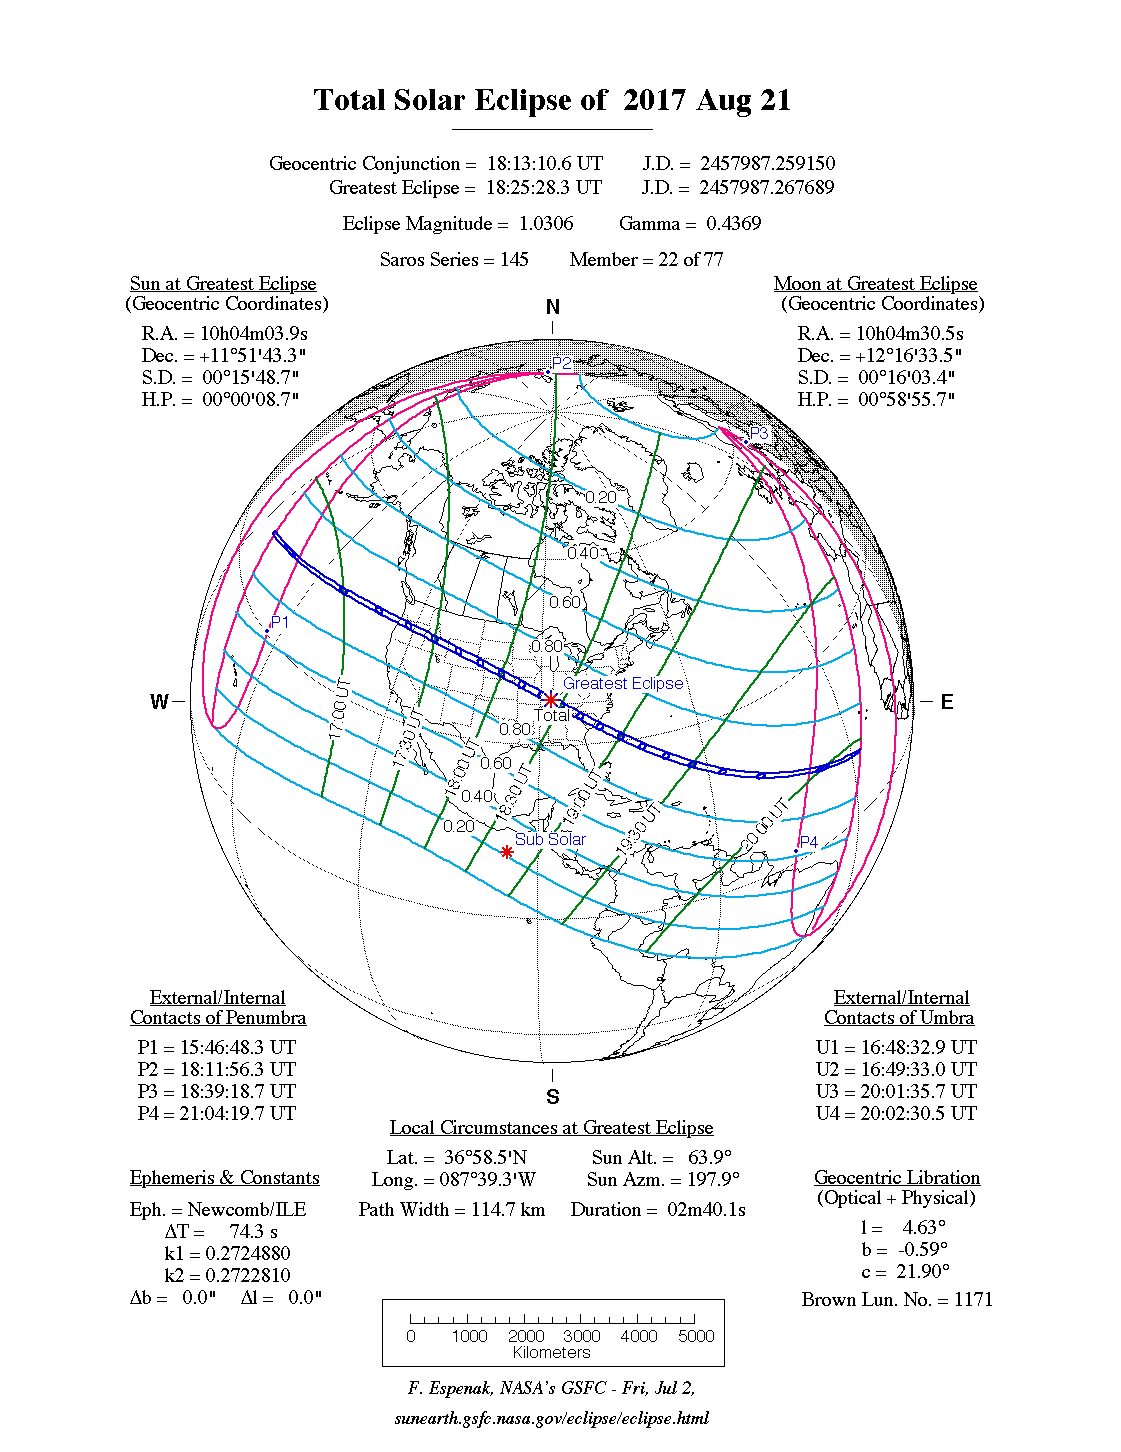 Information of the Greatest Eclipse